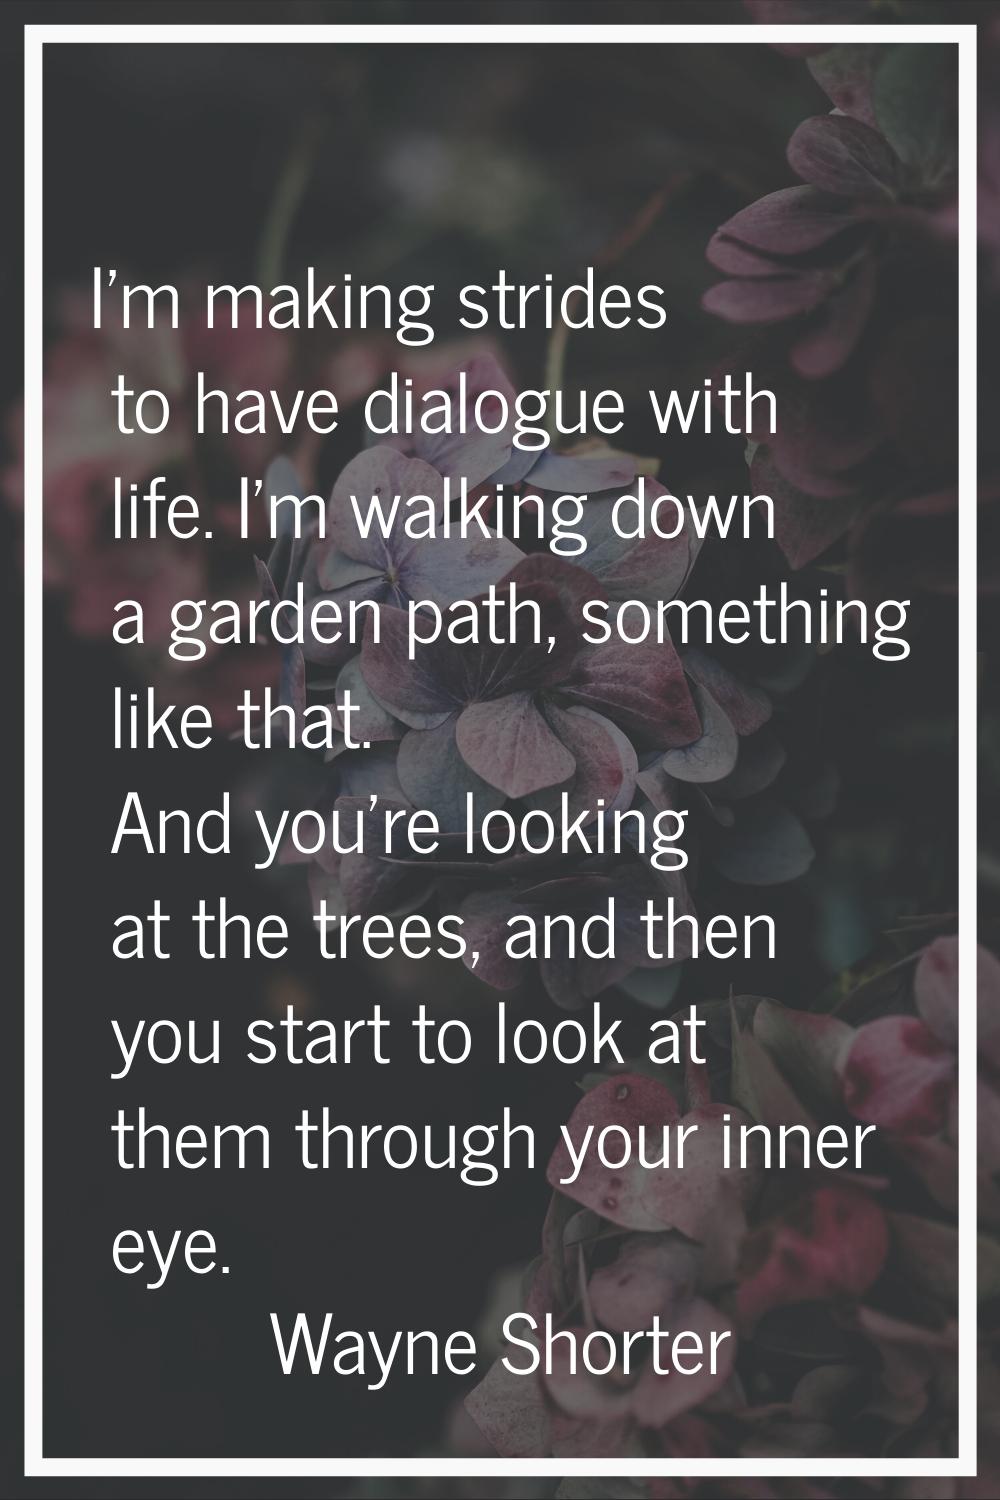 I'm making strides to have dialogue with life. I'm walking down a garden path, something like that.